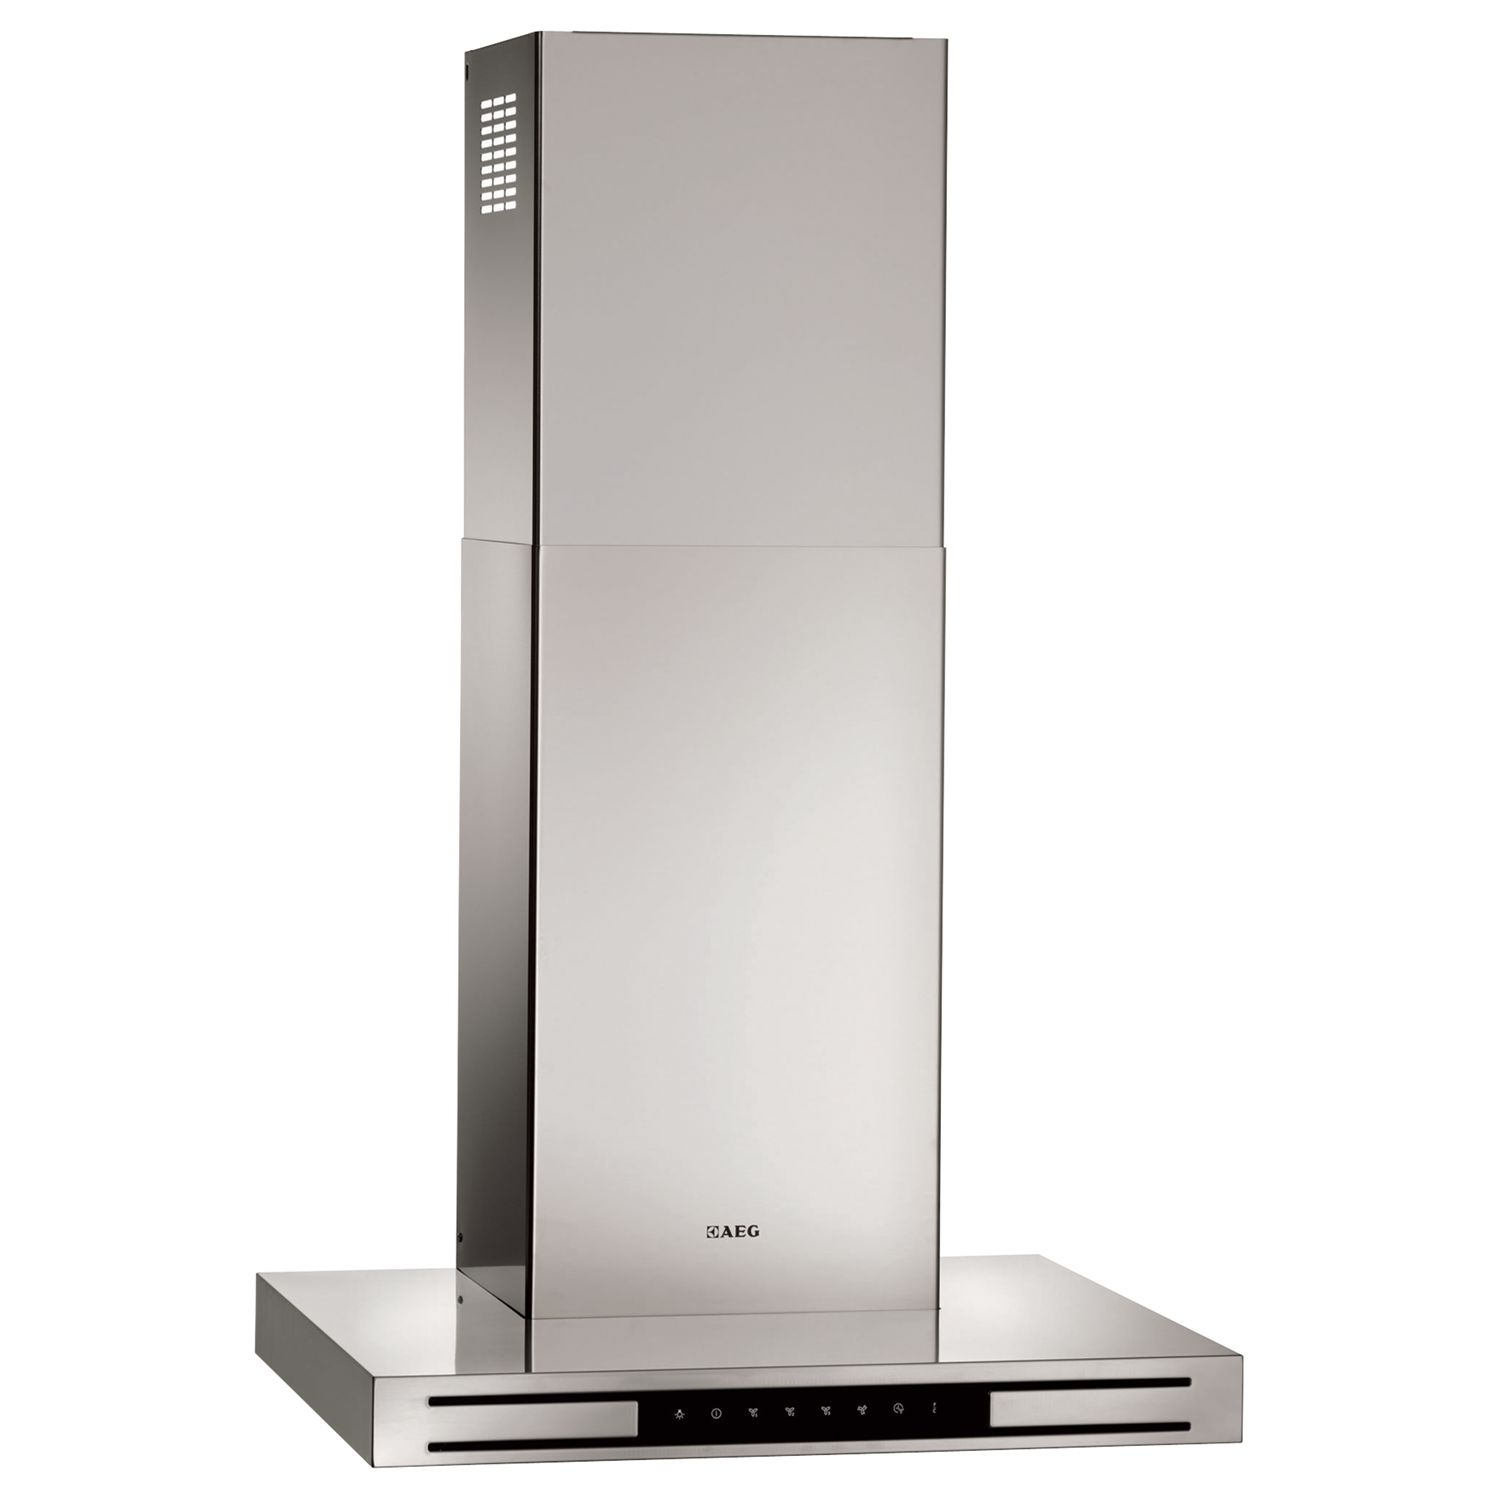 X66453MD0 Chimney Cooker Hood, Stainless